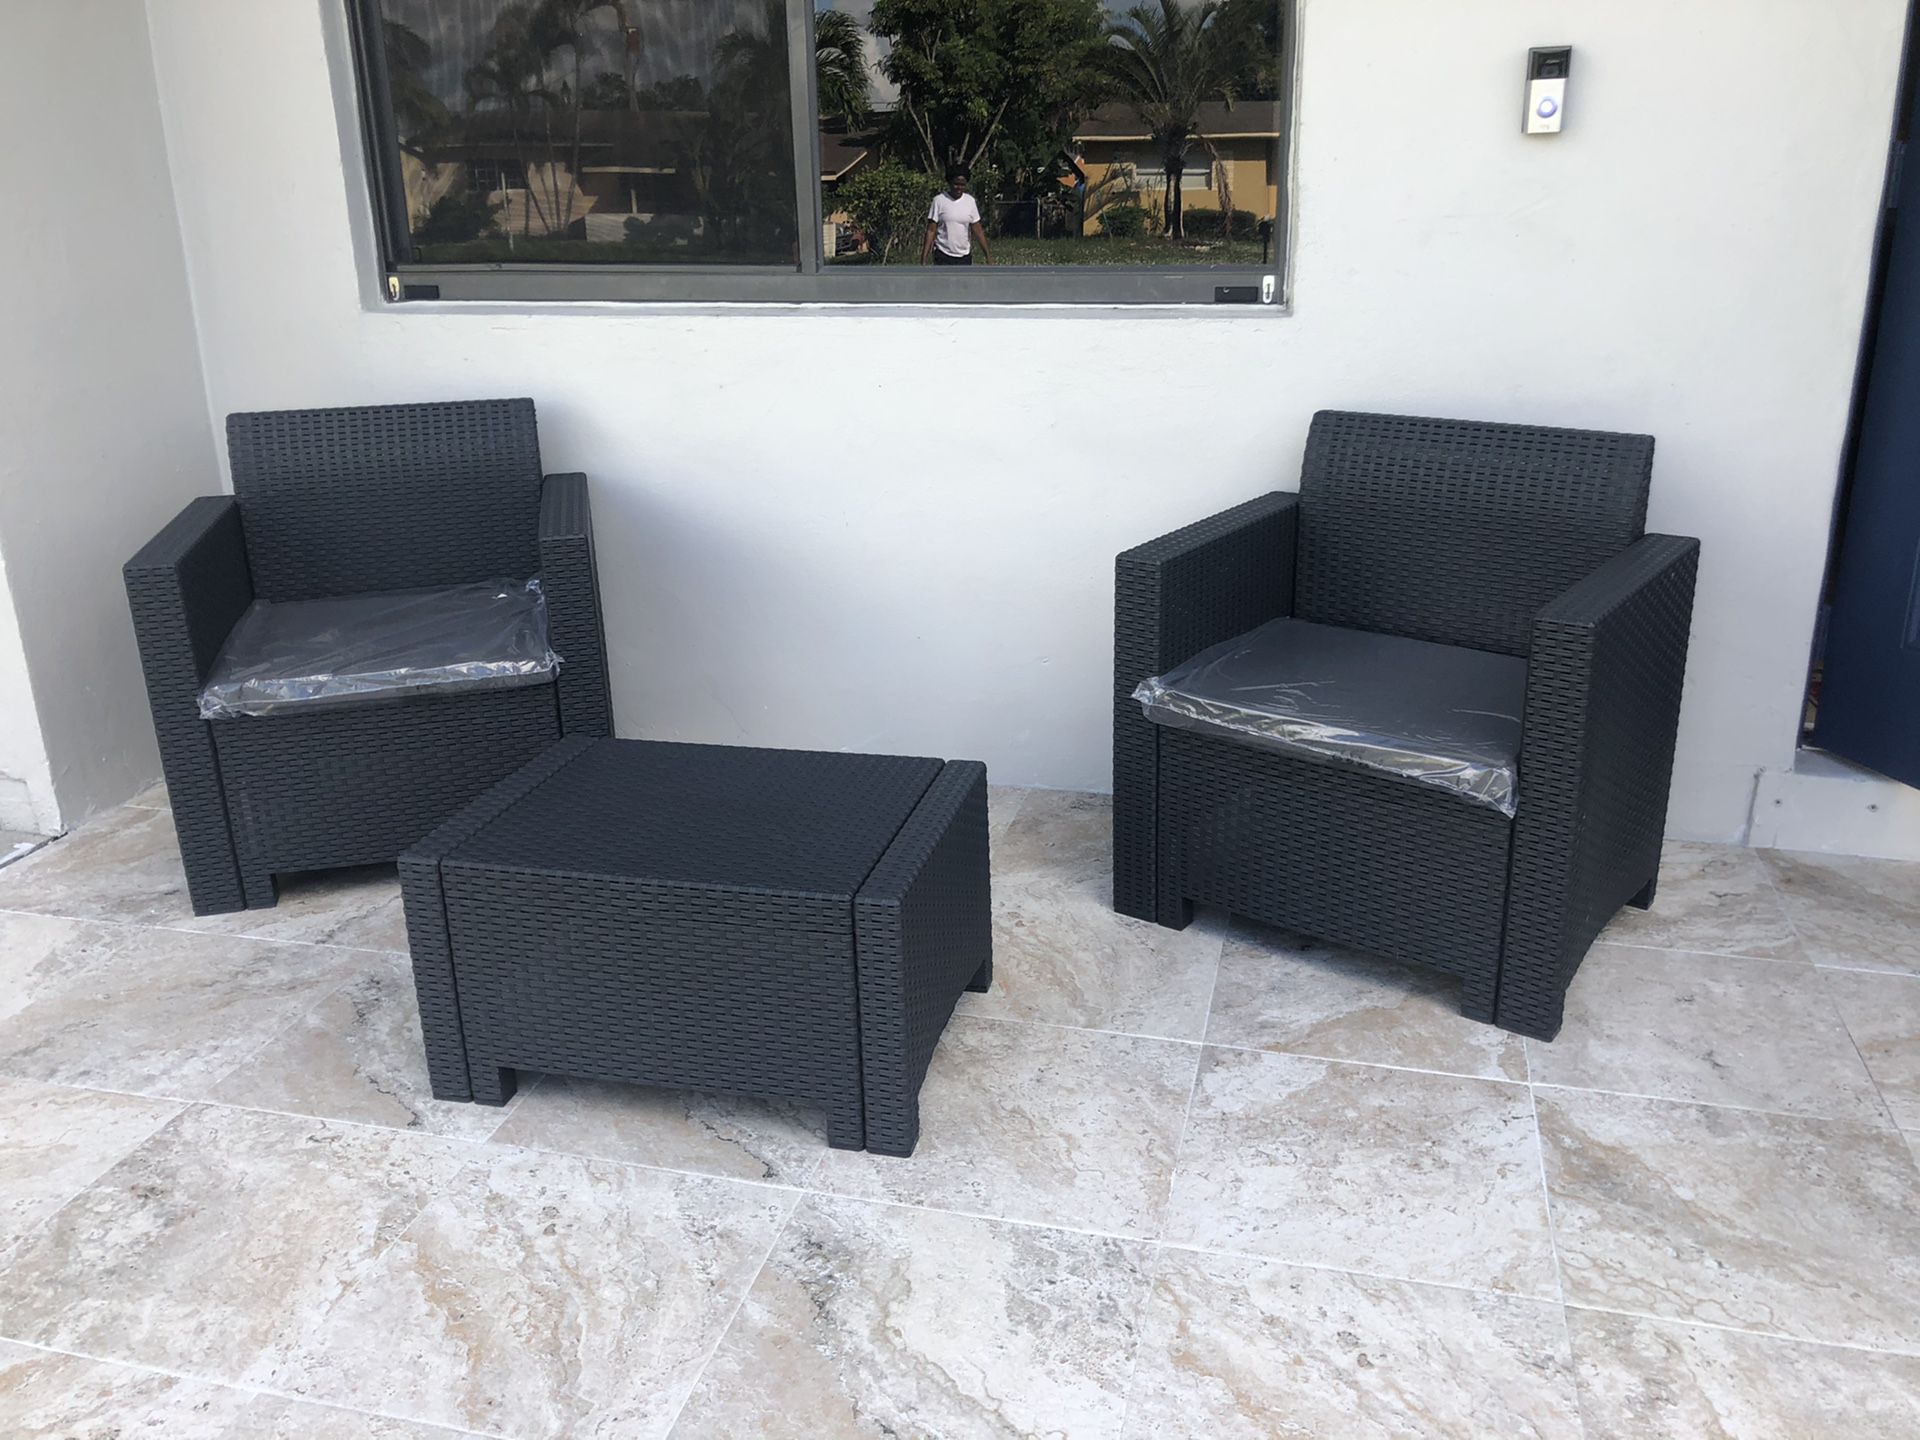 All resin without metals / Furniture / Patio furniture / outdoor furniture / Muebles de patio /patio set